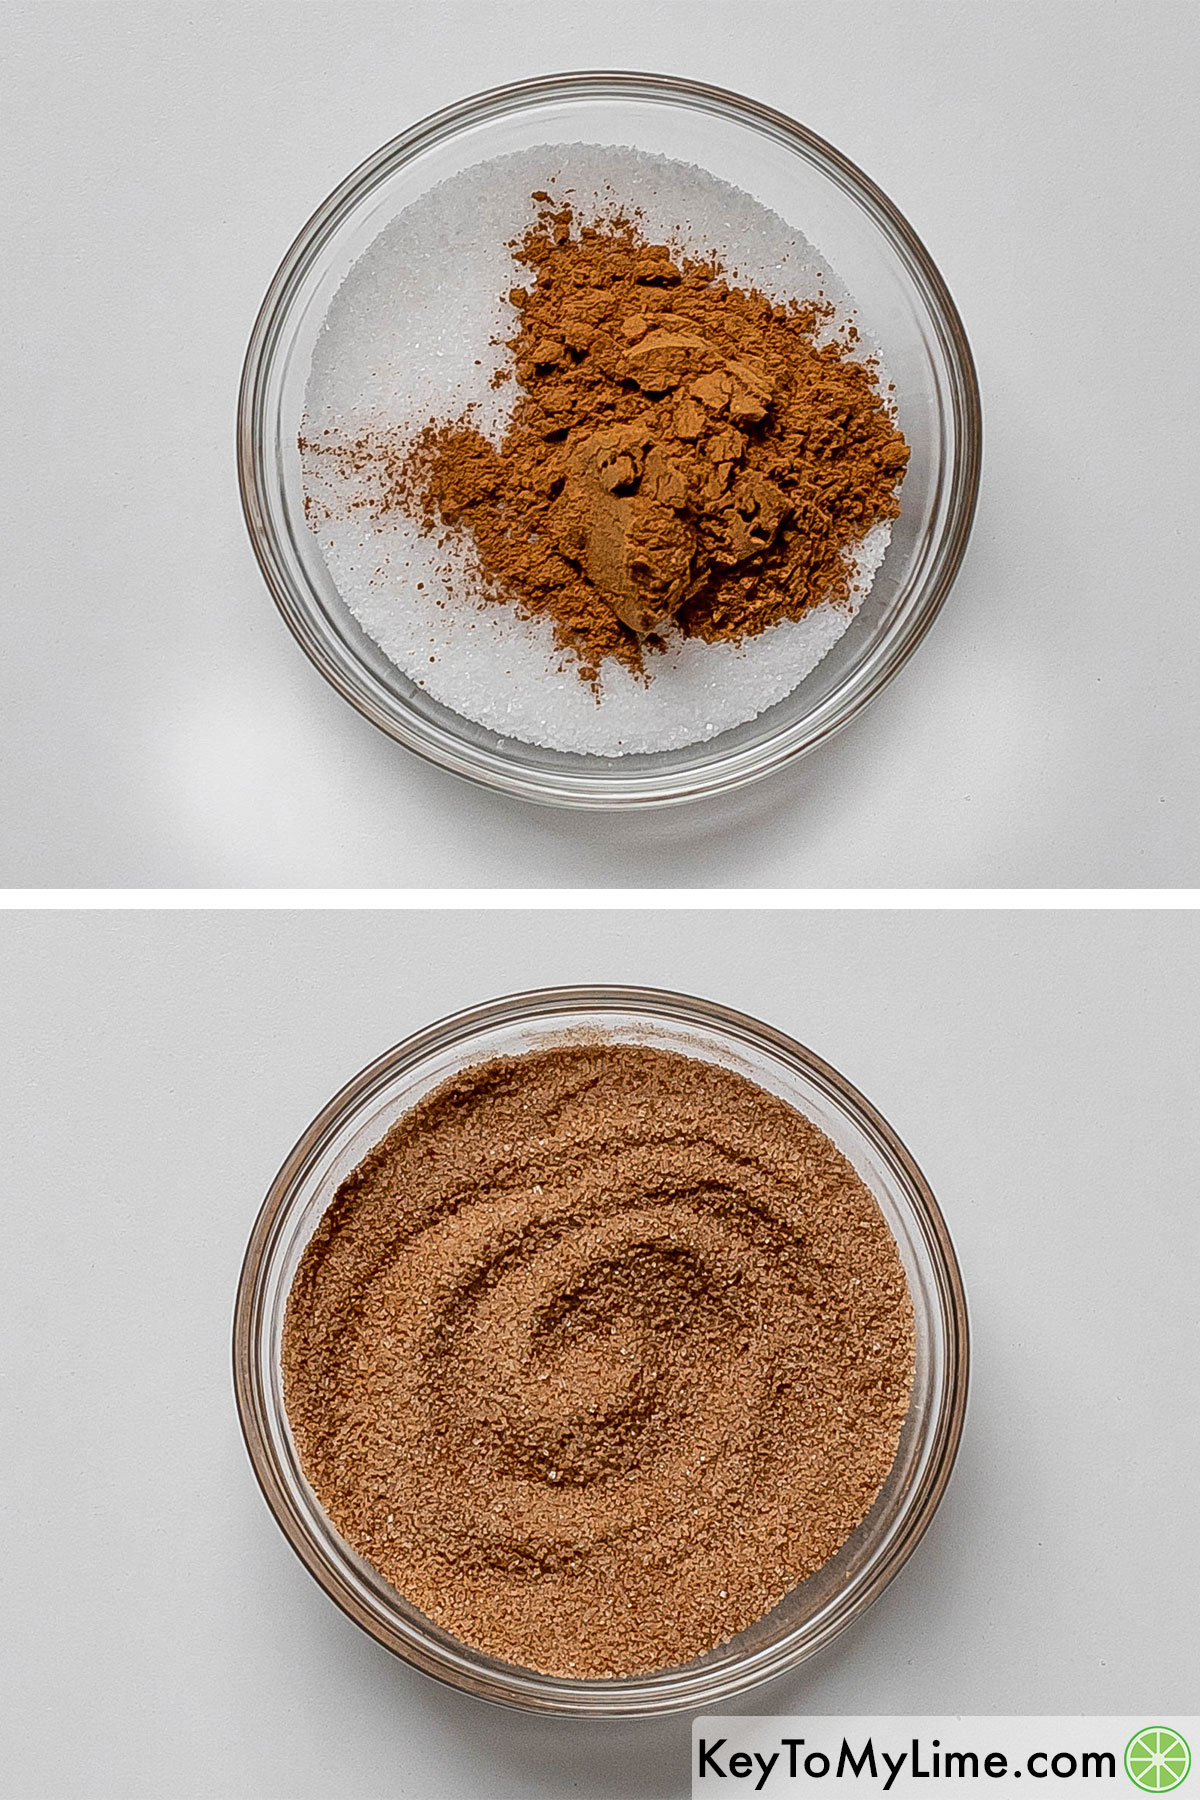 Mixing together granulated sugar and cinnamon together in a small mixing bowl.